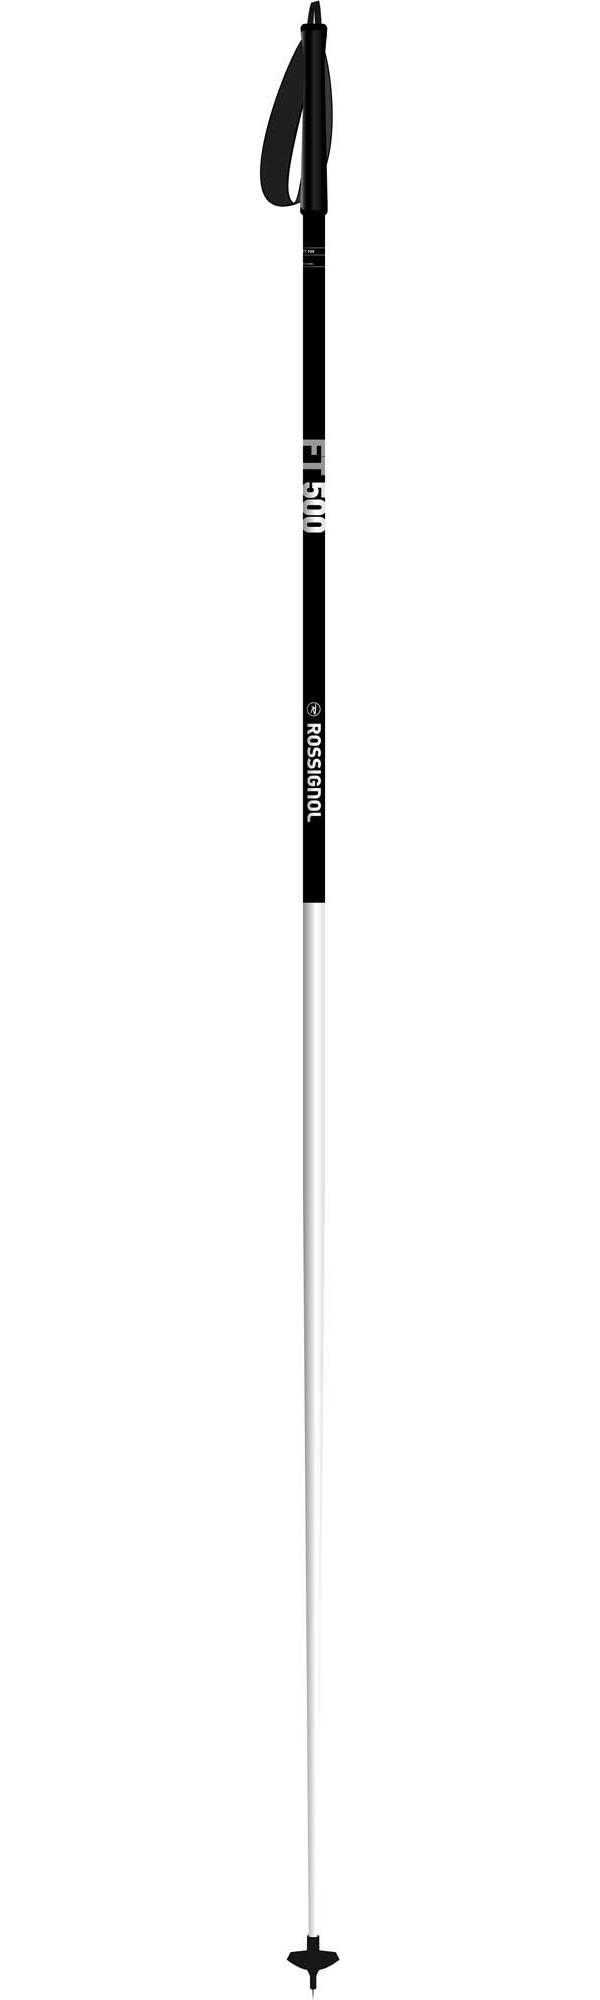 Rossignol Adult FT 500 Cross-Country Ski Poles product image